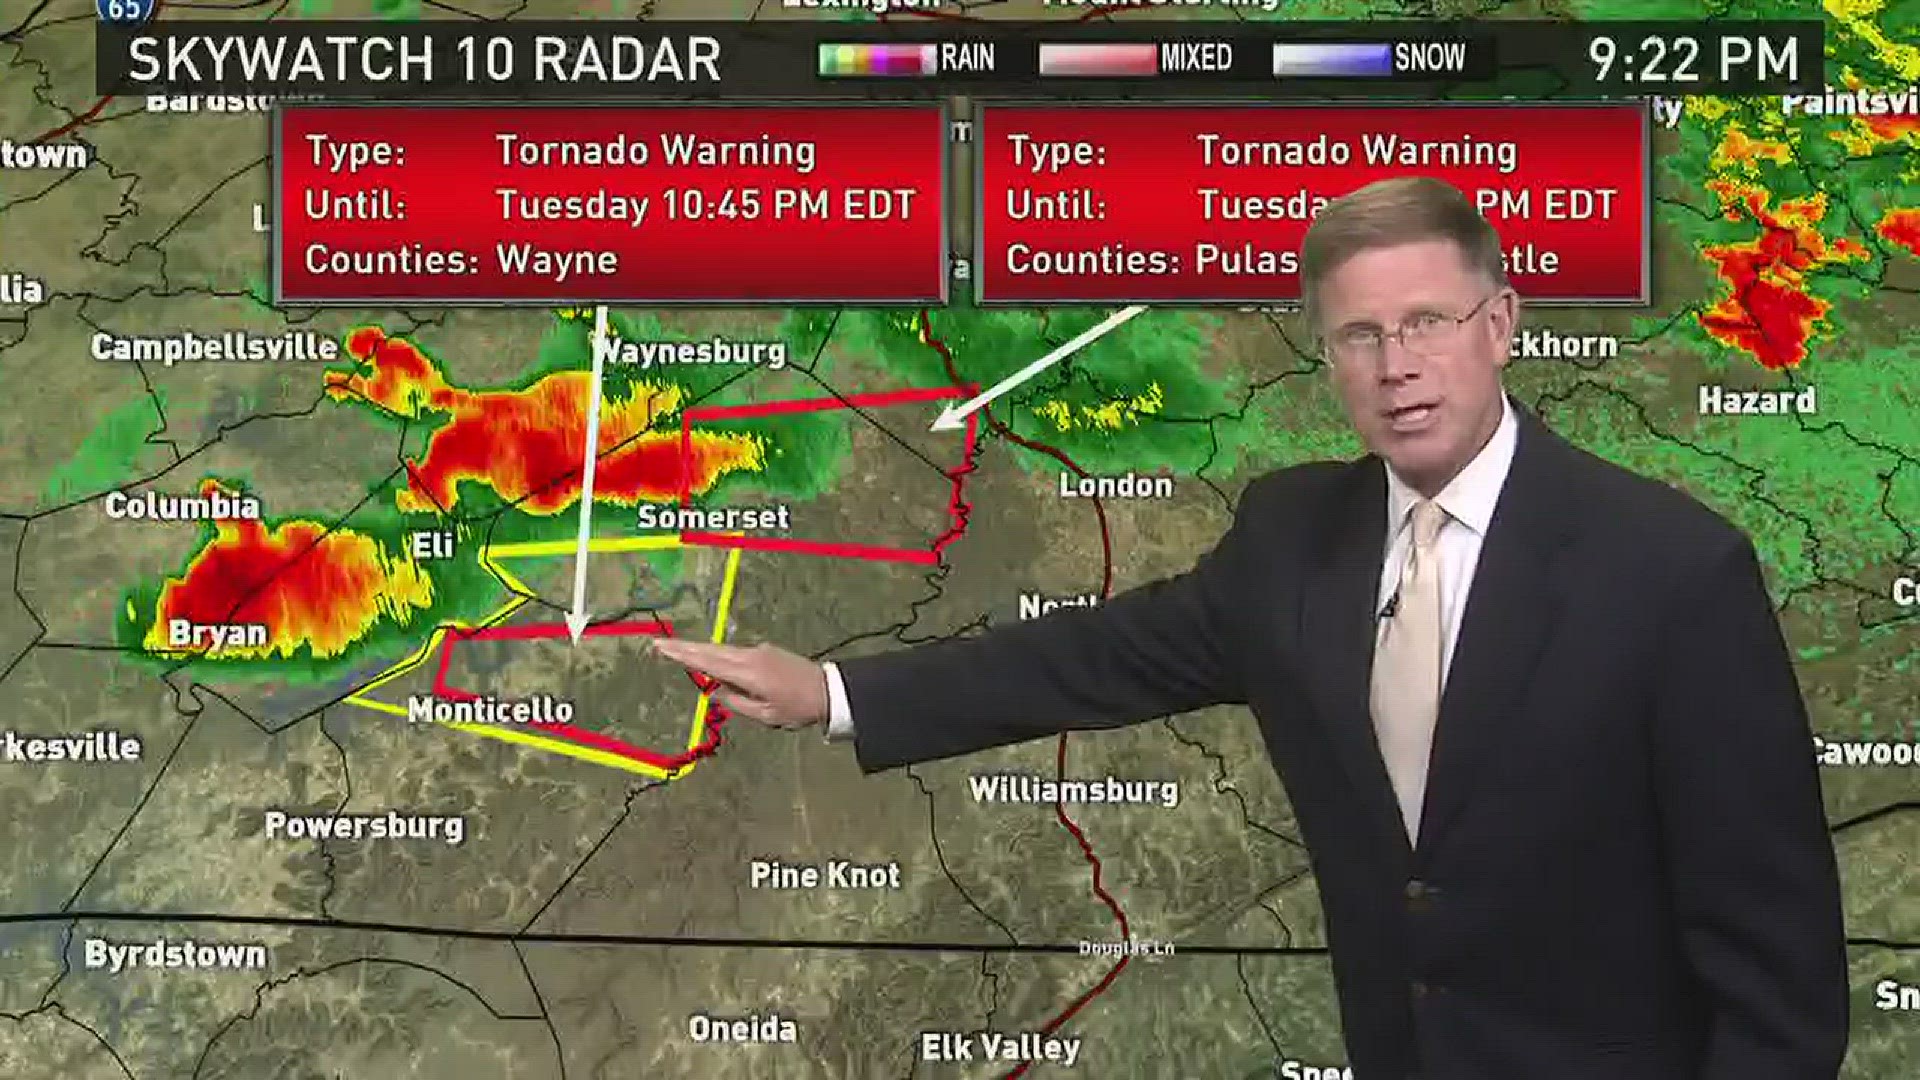 May 10, 2016 at 10:15 p.m. Todd Howell updates us on storms hitting Kentucky, especially as tornado warnings are issued for Wayne & Pulaski counties.